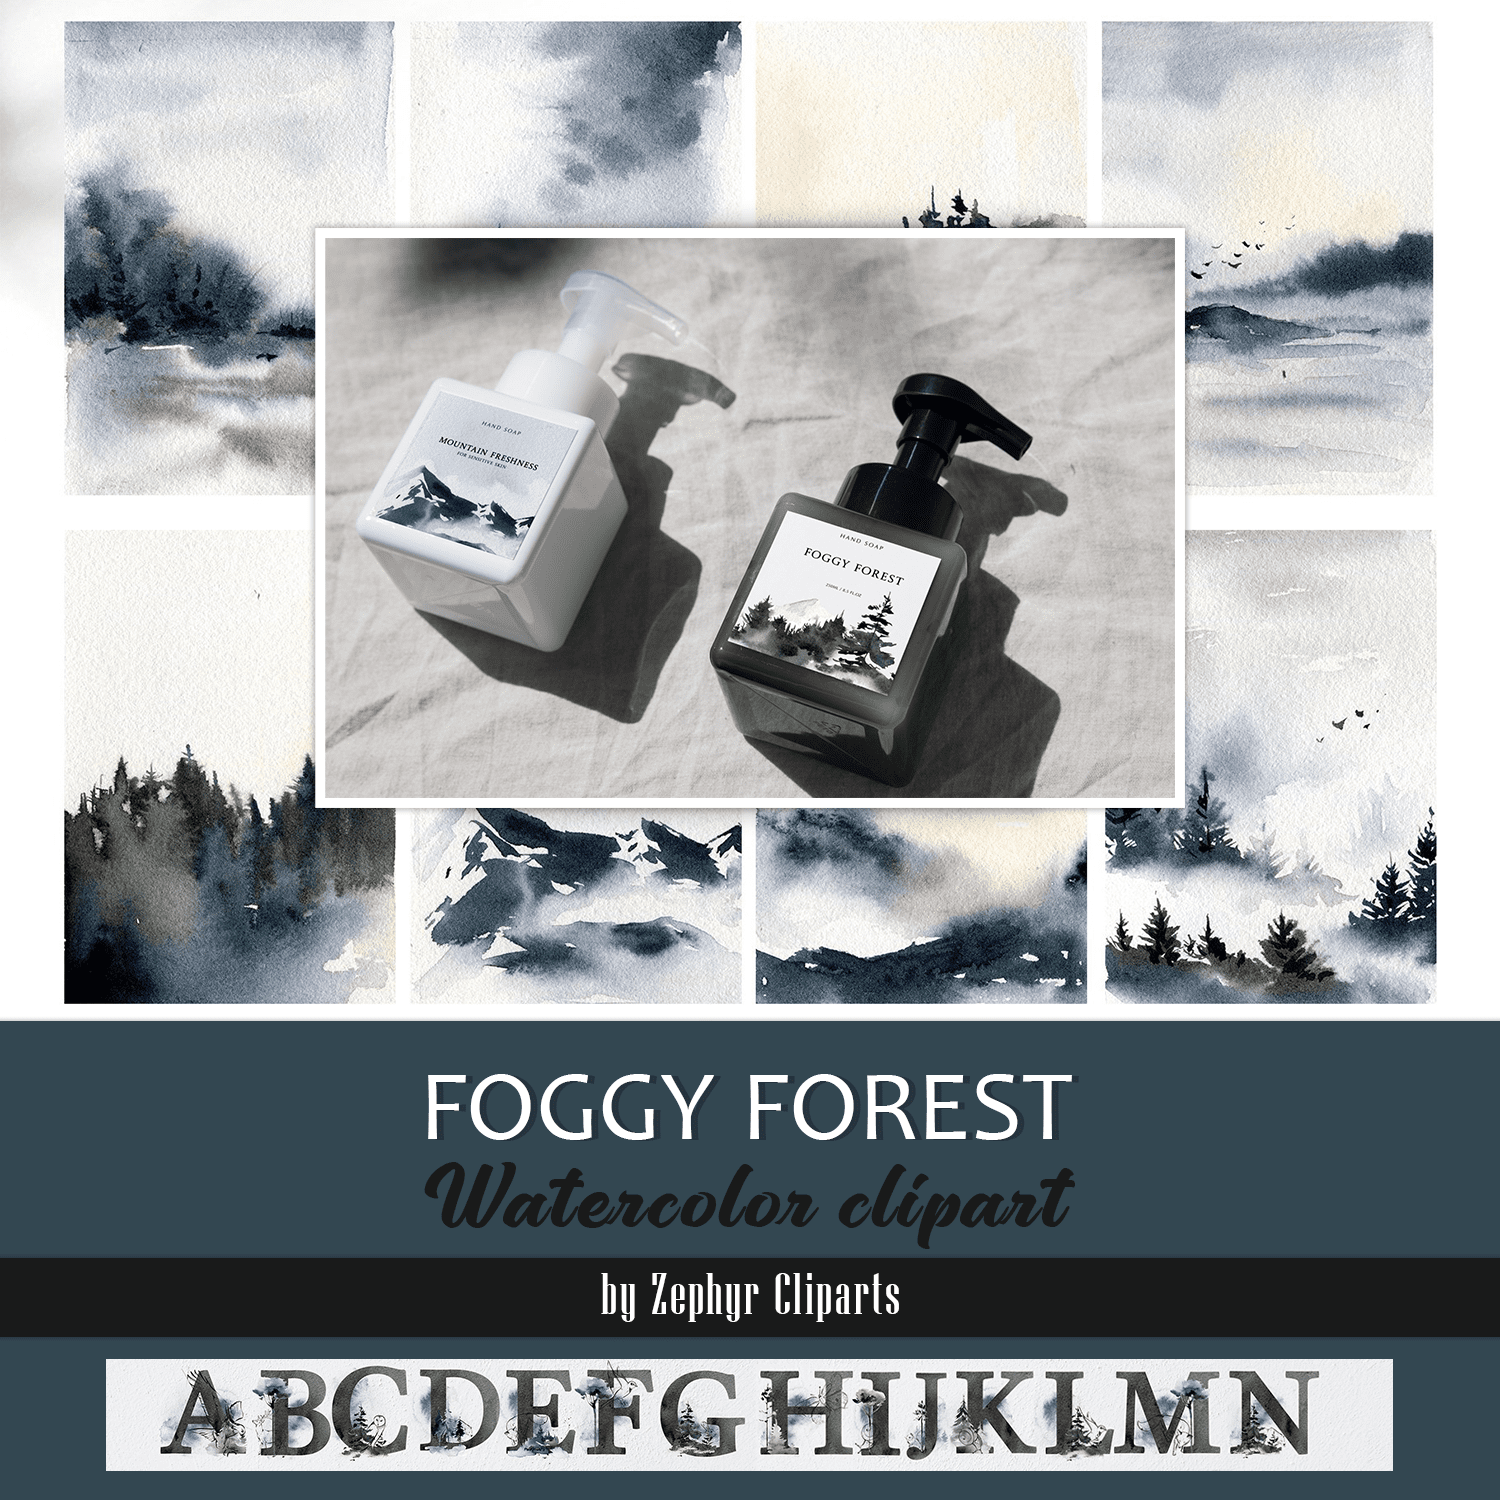 FOGGY FOREST Watercolor clipart cover.